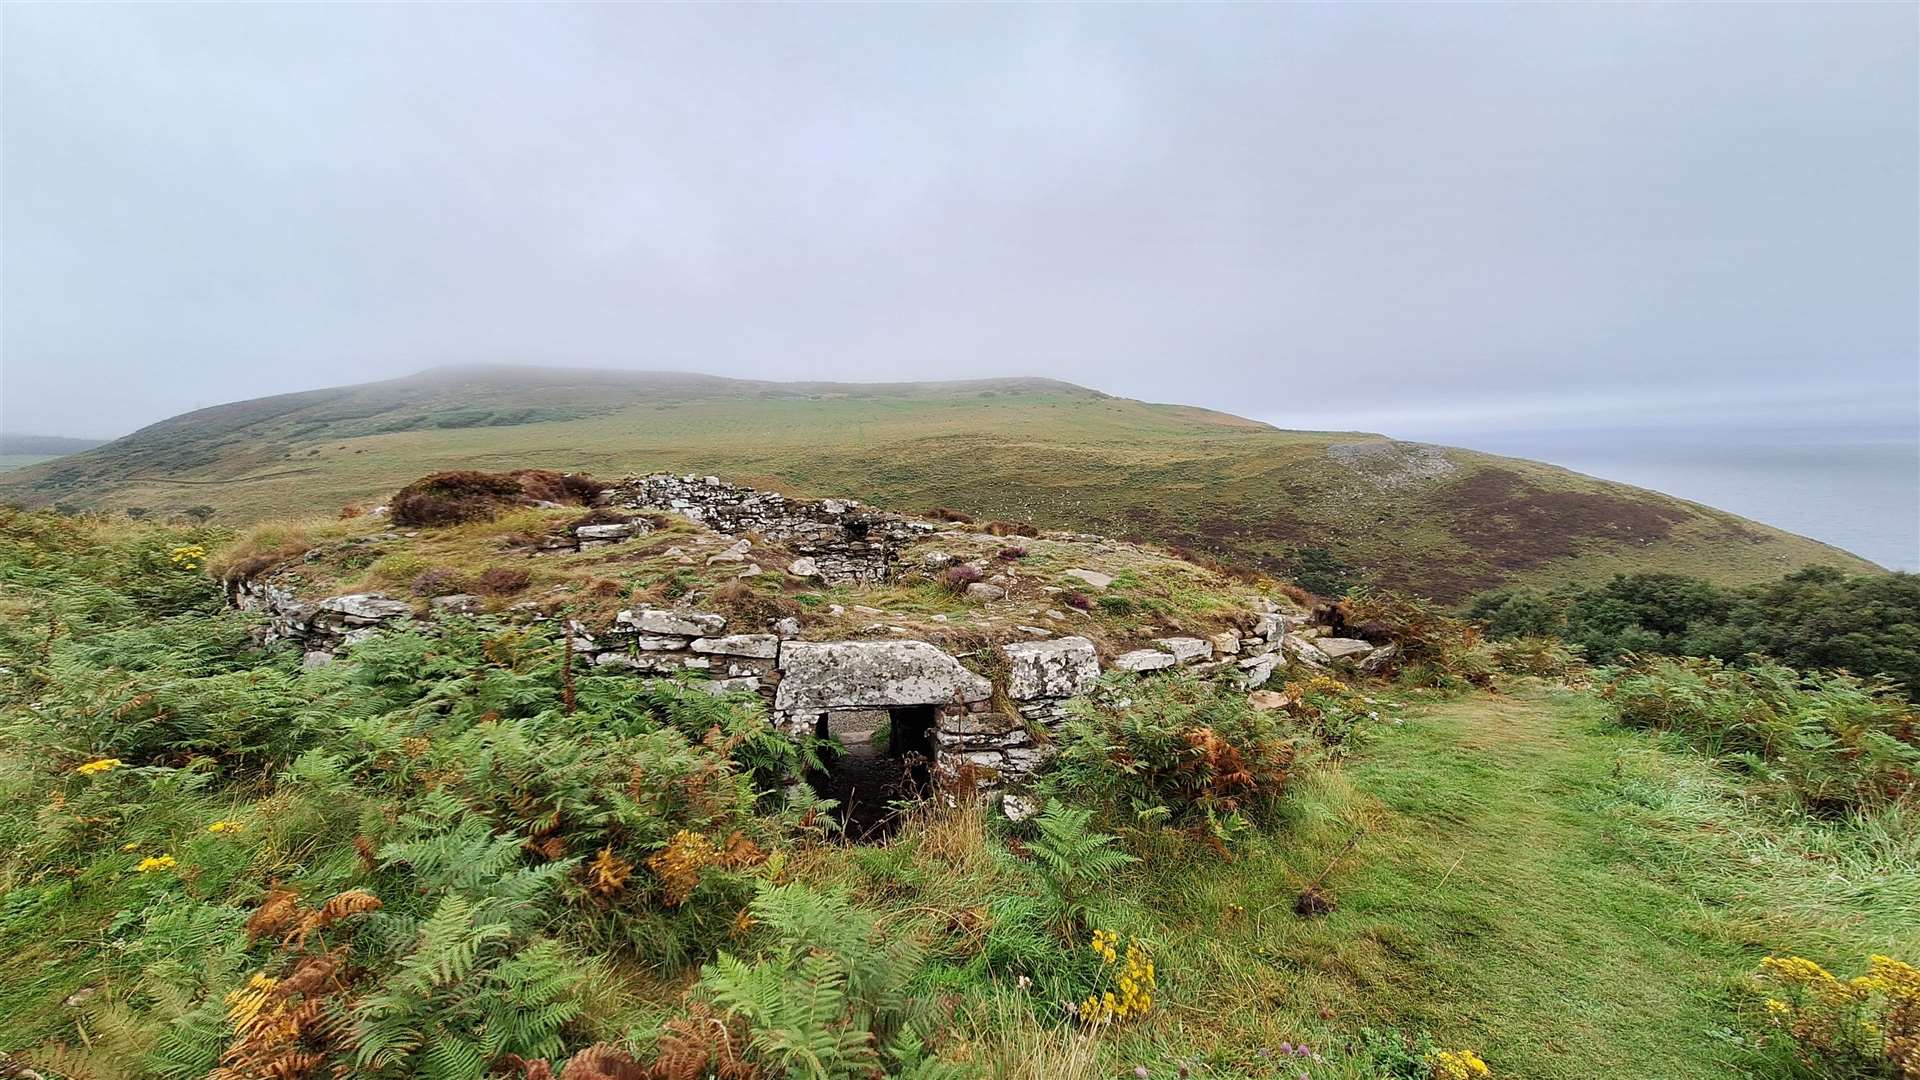 Ousdale Broch has been preserved thanks to the work of the Caithness Broch Project and others.